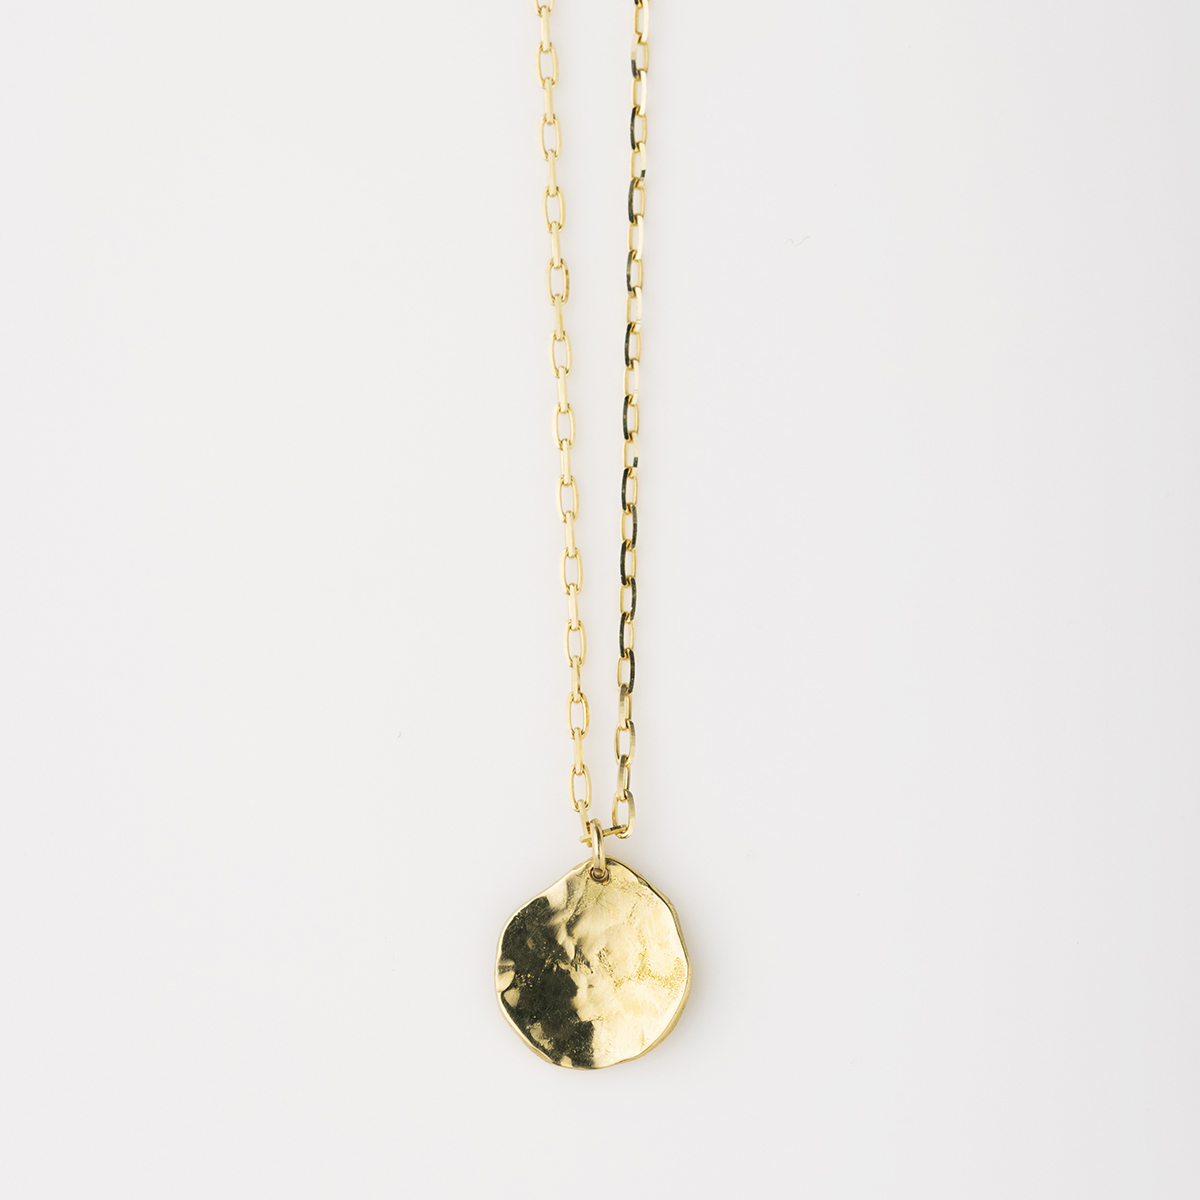 PRK COIN NECKLACE